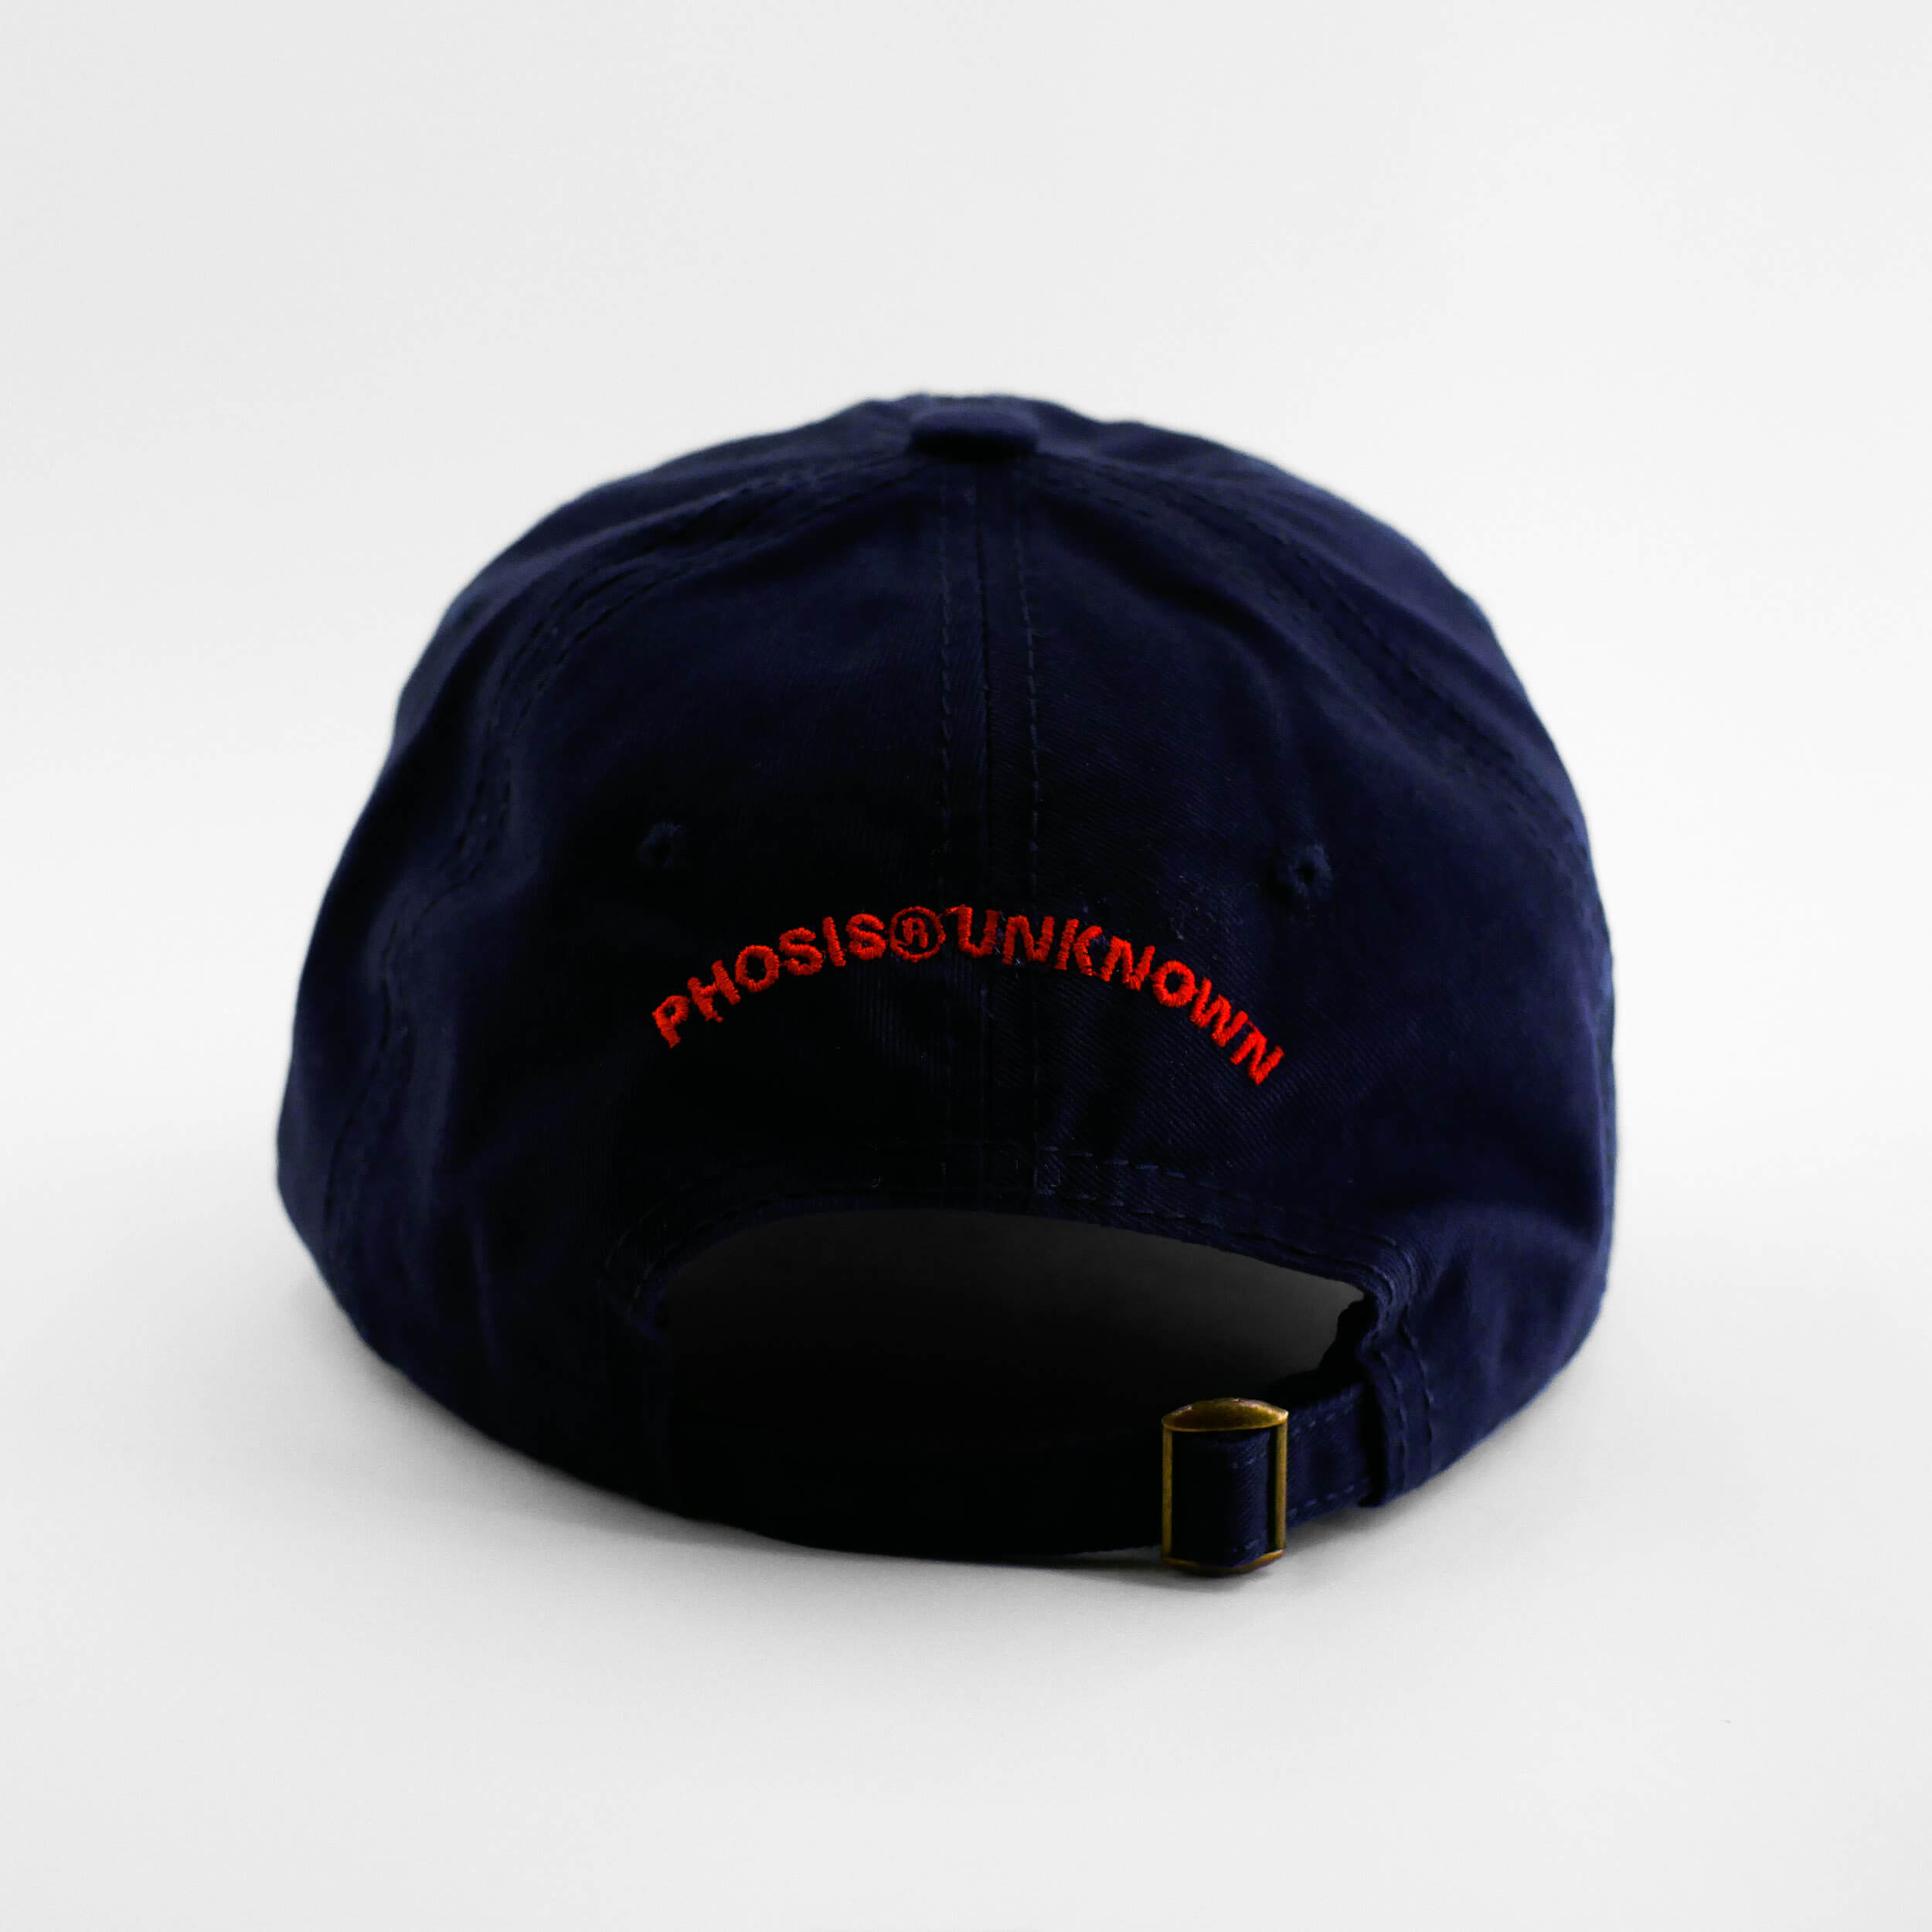 Back view of the embroidered ASCII Rose navy blue hat from PHOSIS Clothing